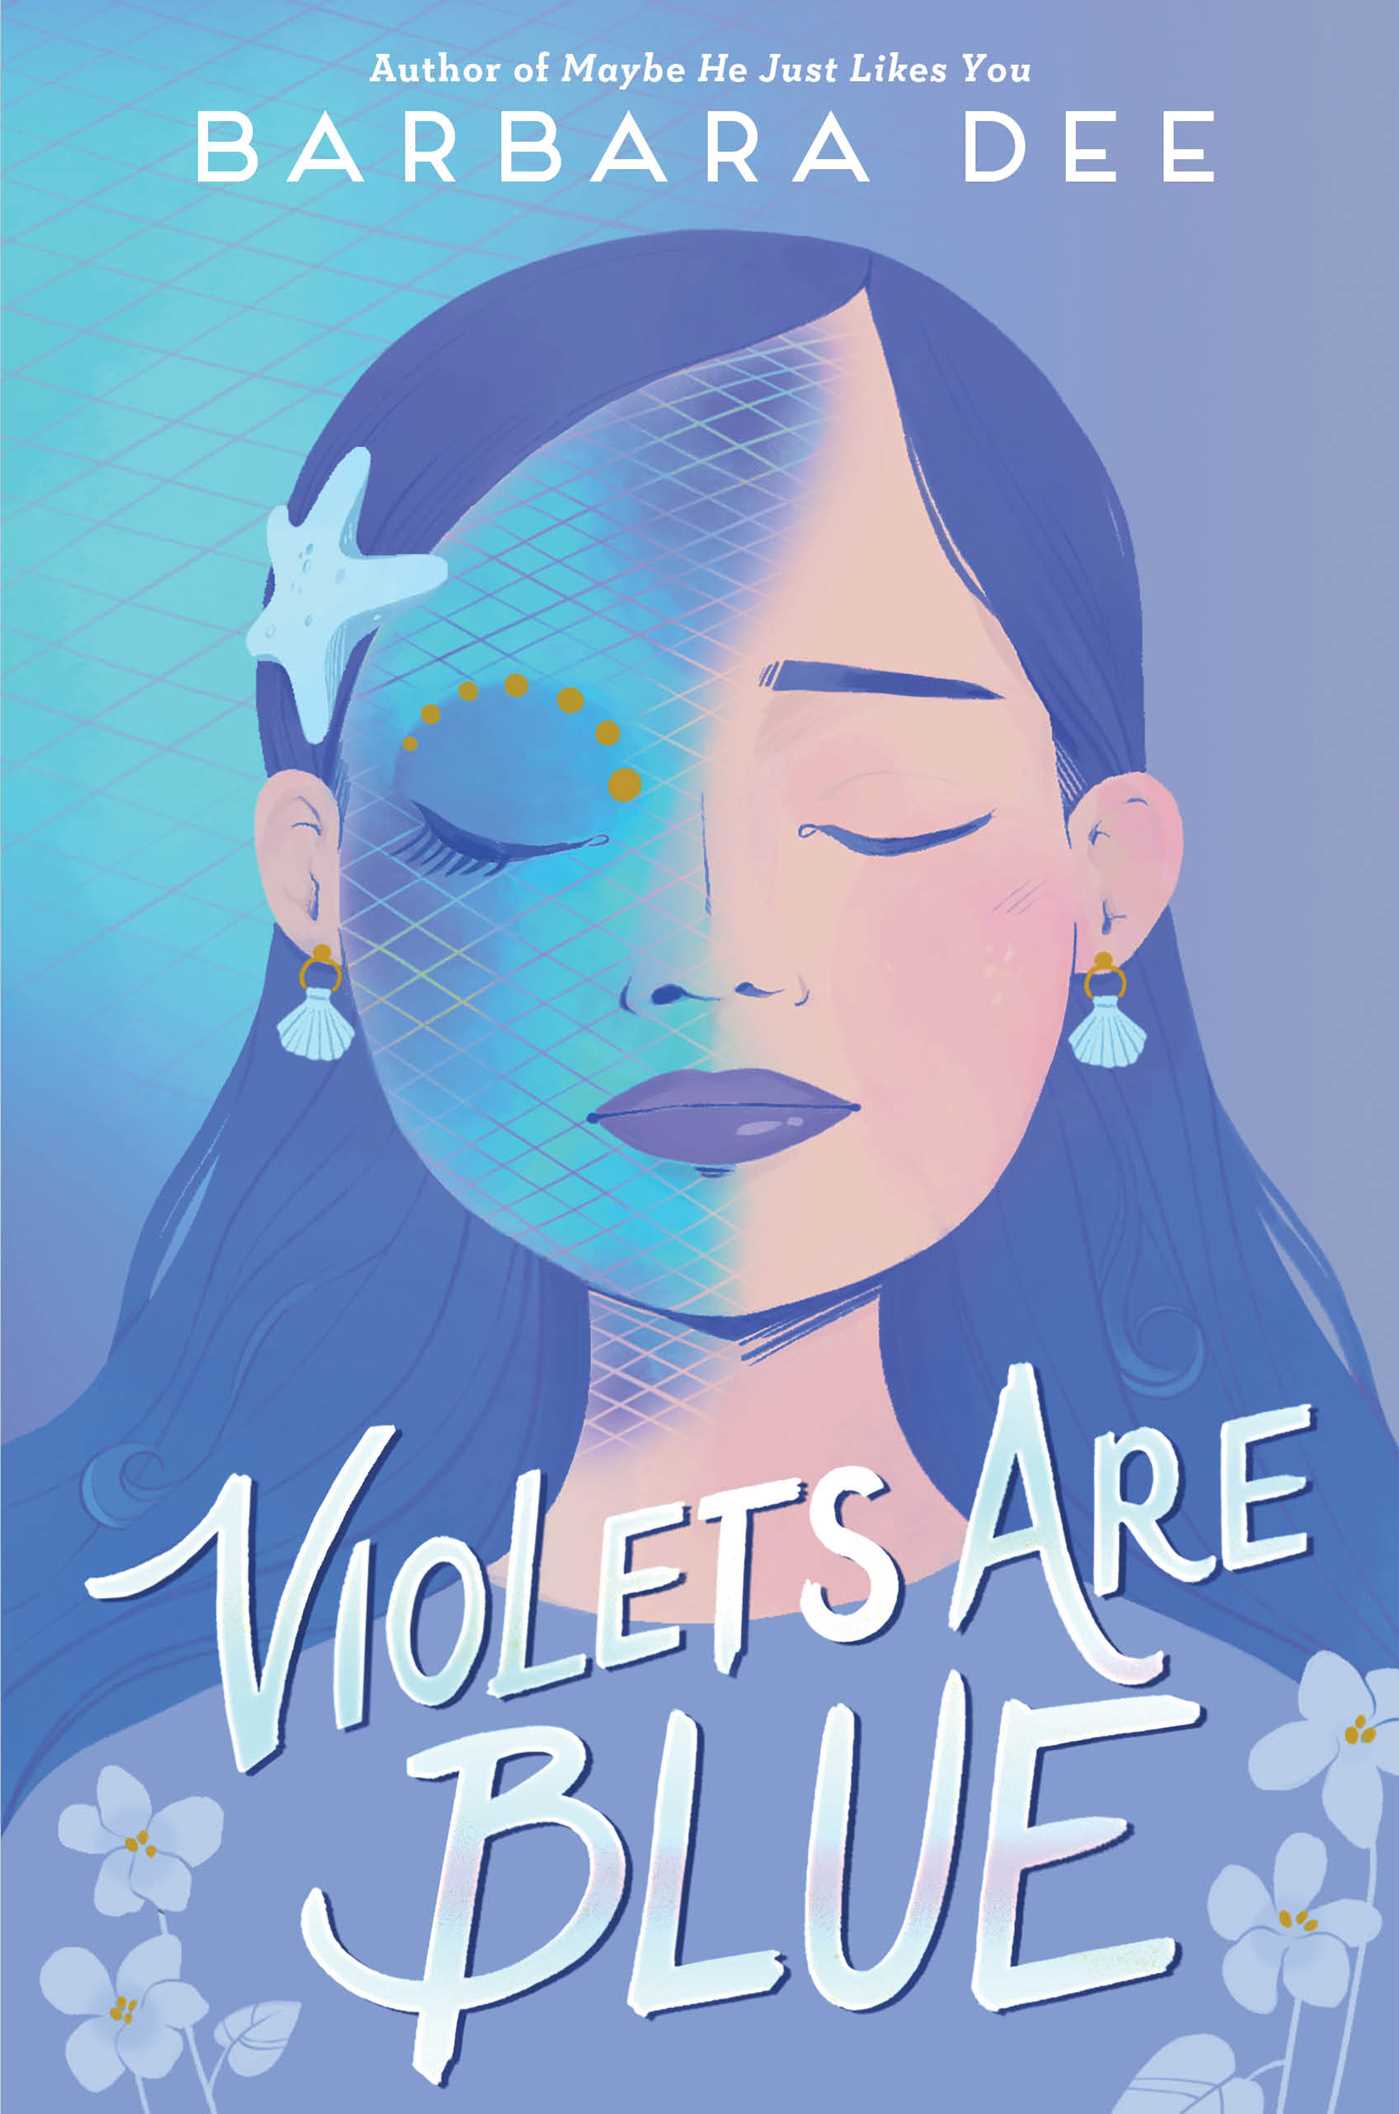 Cover of "Violets Are Blue"